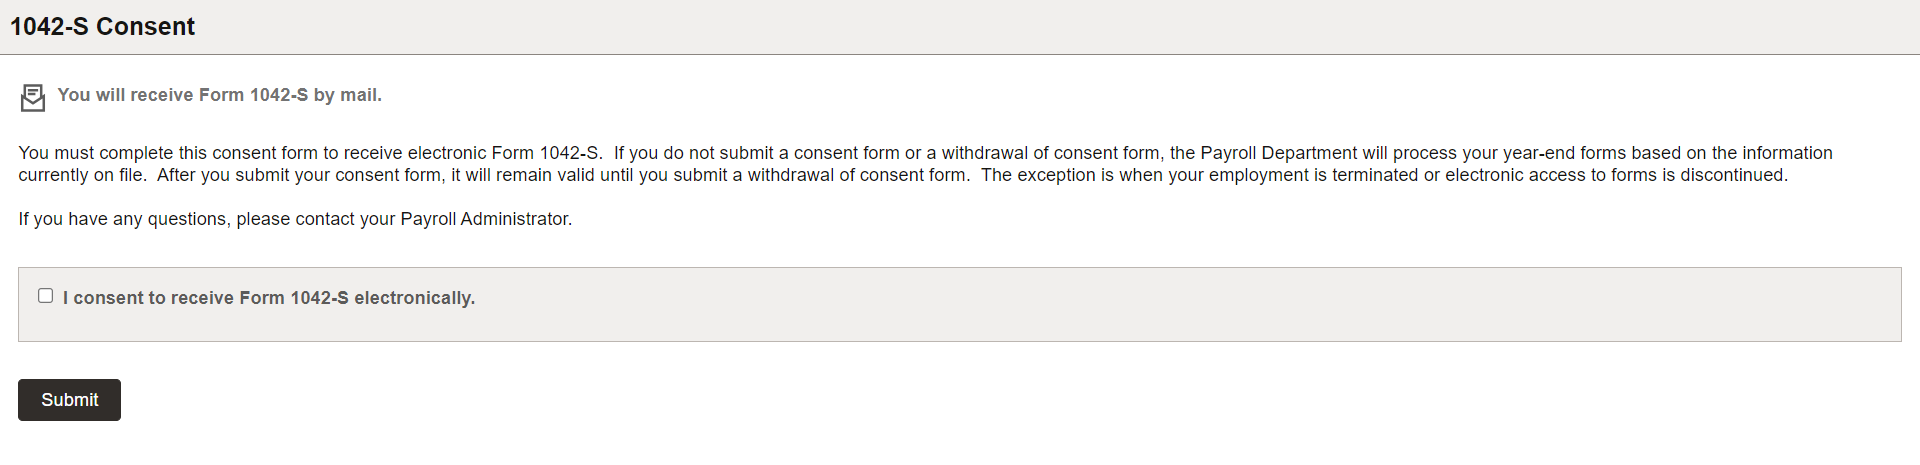 1042-S Consent page (currently receiving paper form)